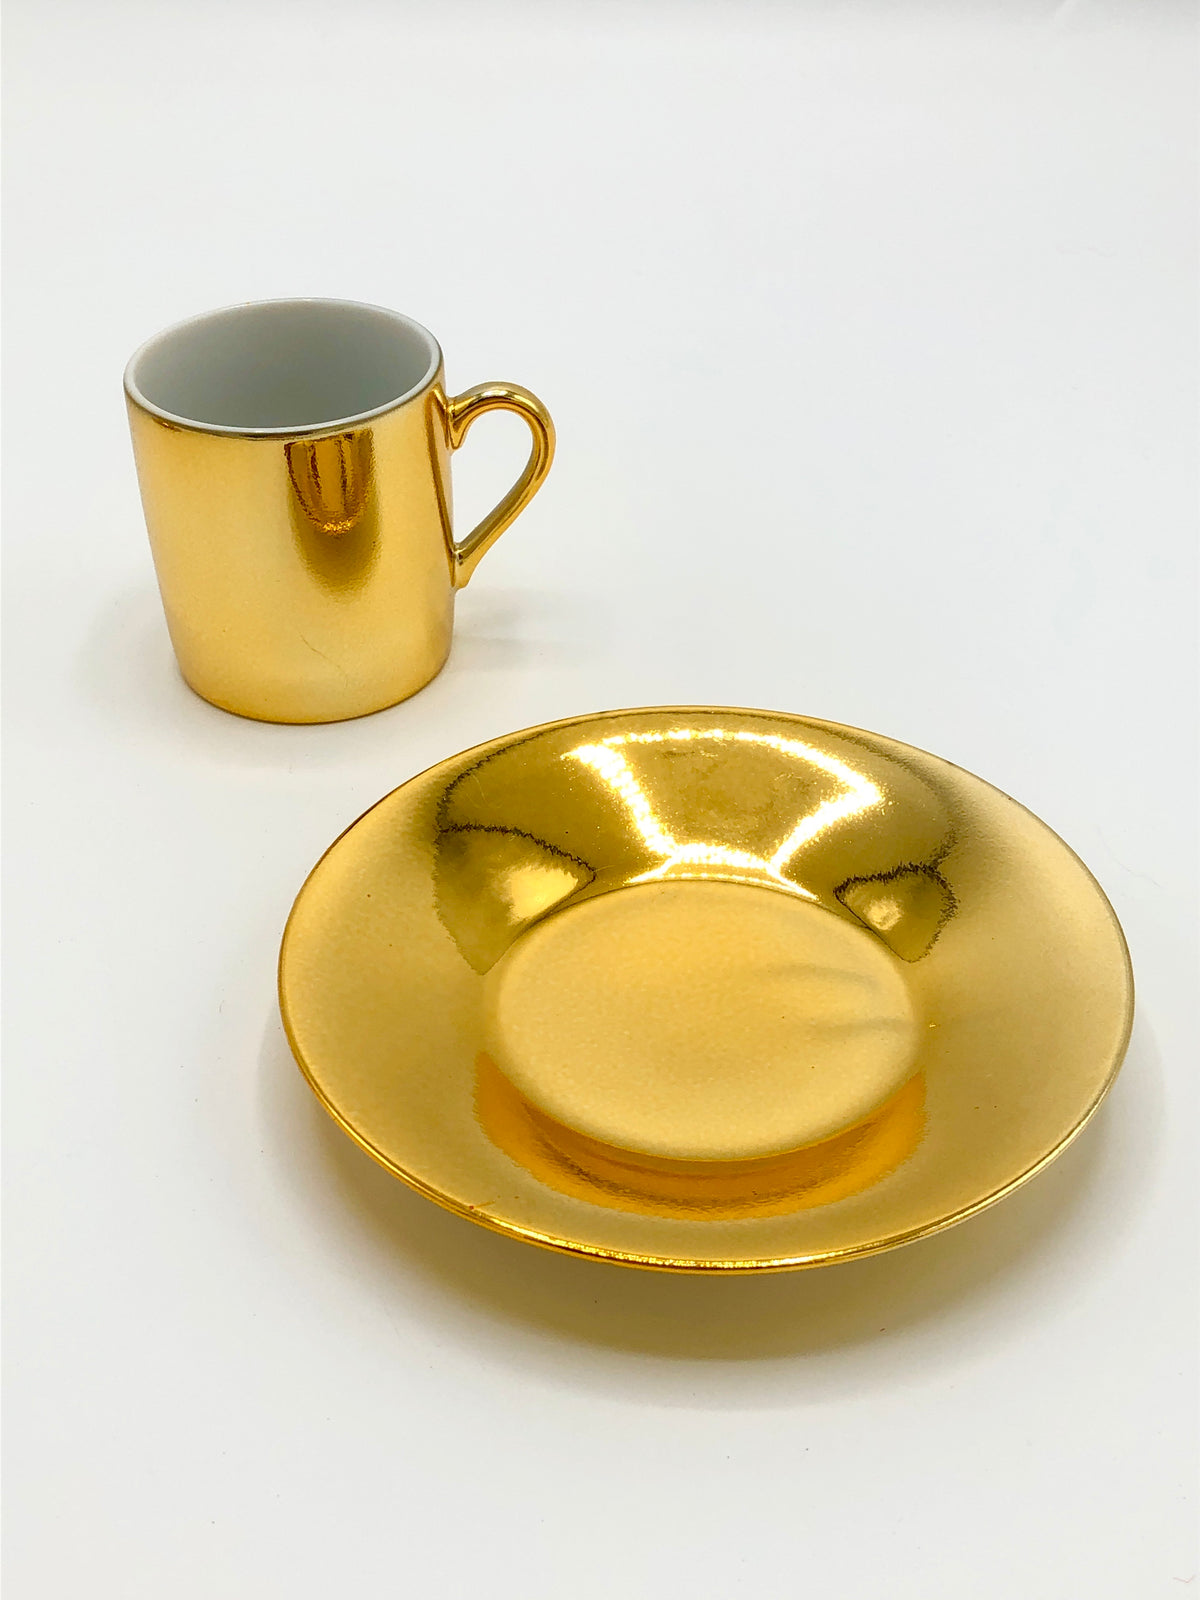 Vintage Gold-Plated Demitasse Duo